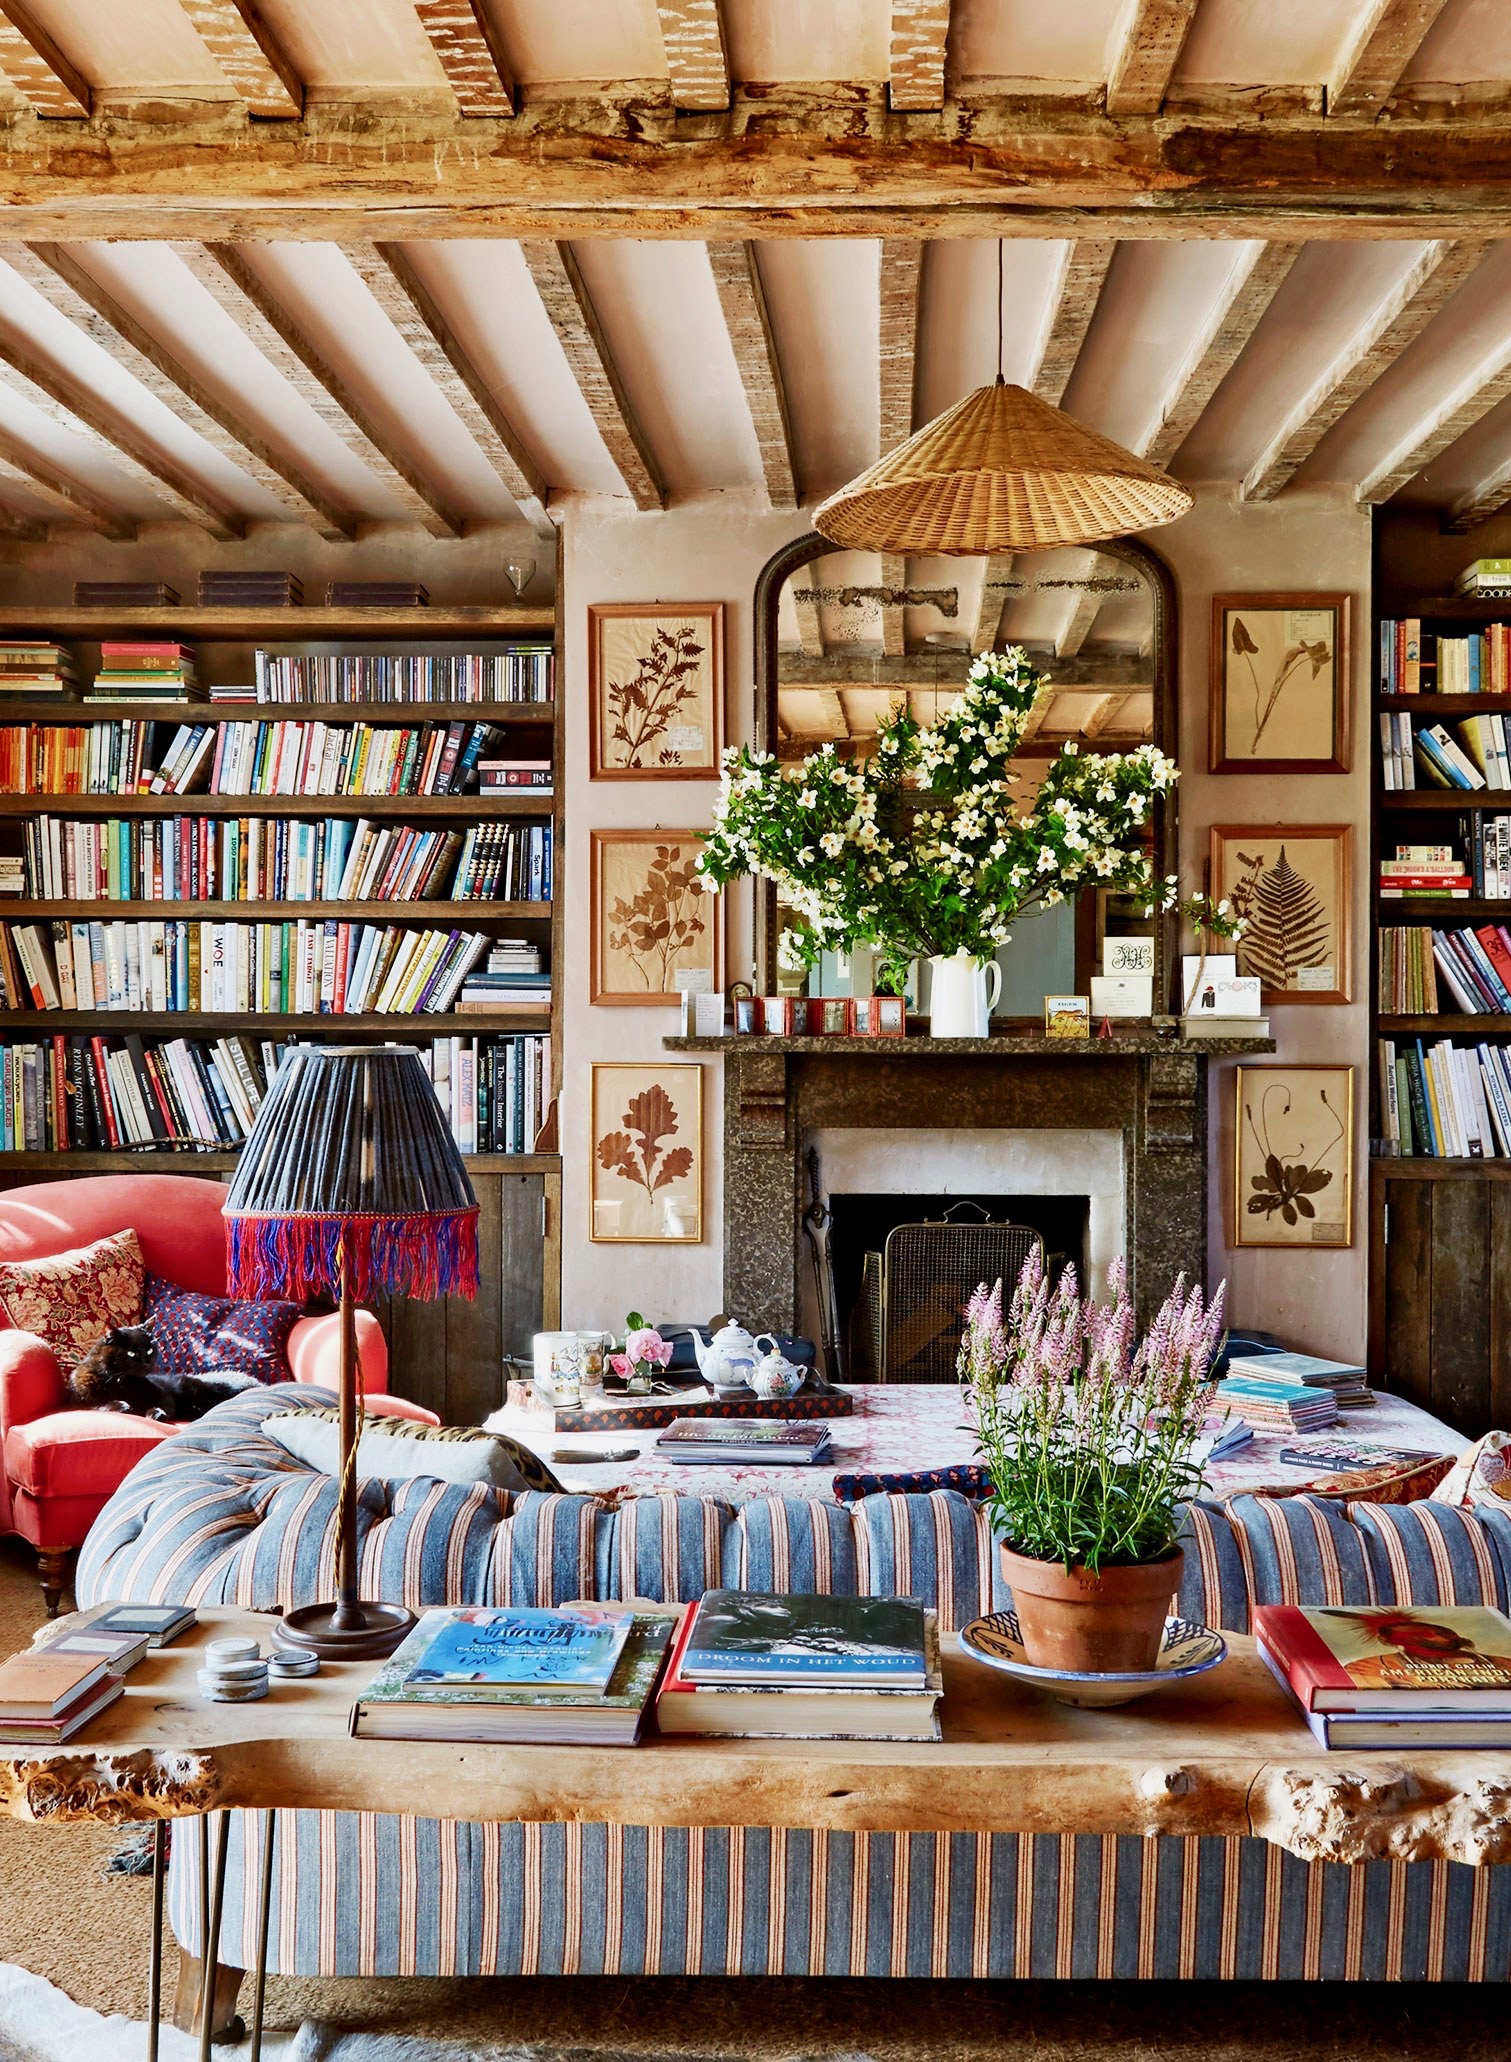 How To Decorate Your Home In The English Country House Style